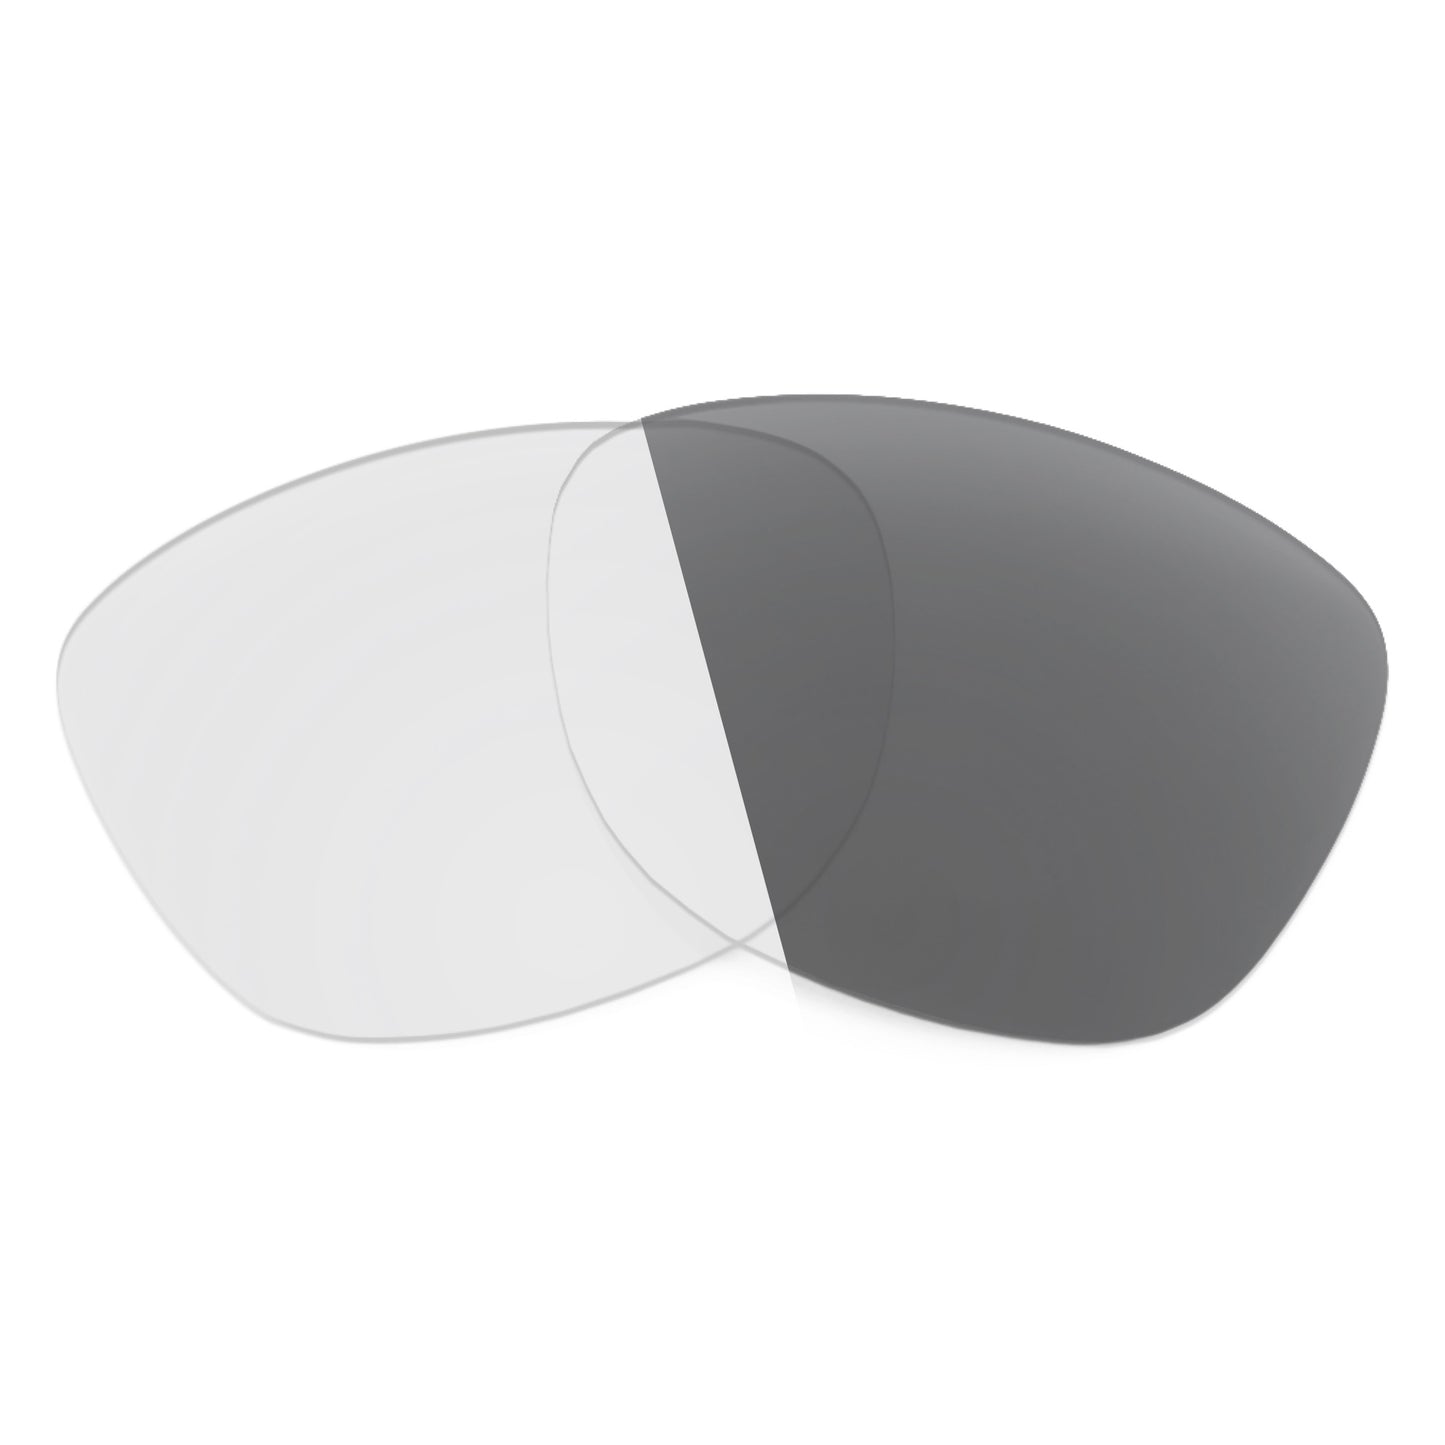 Revant replacement lenses for Electric Crasher 53mm (L) Non-Polarized Adapt Gray Photochromic